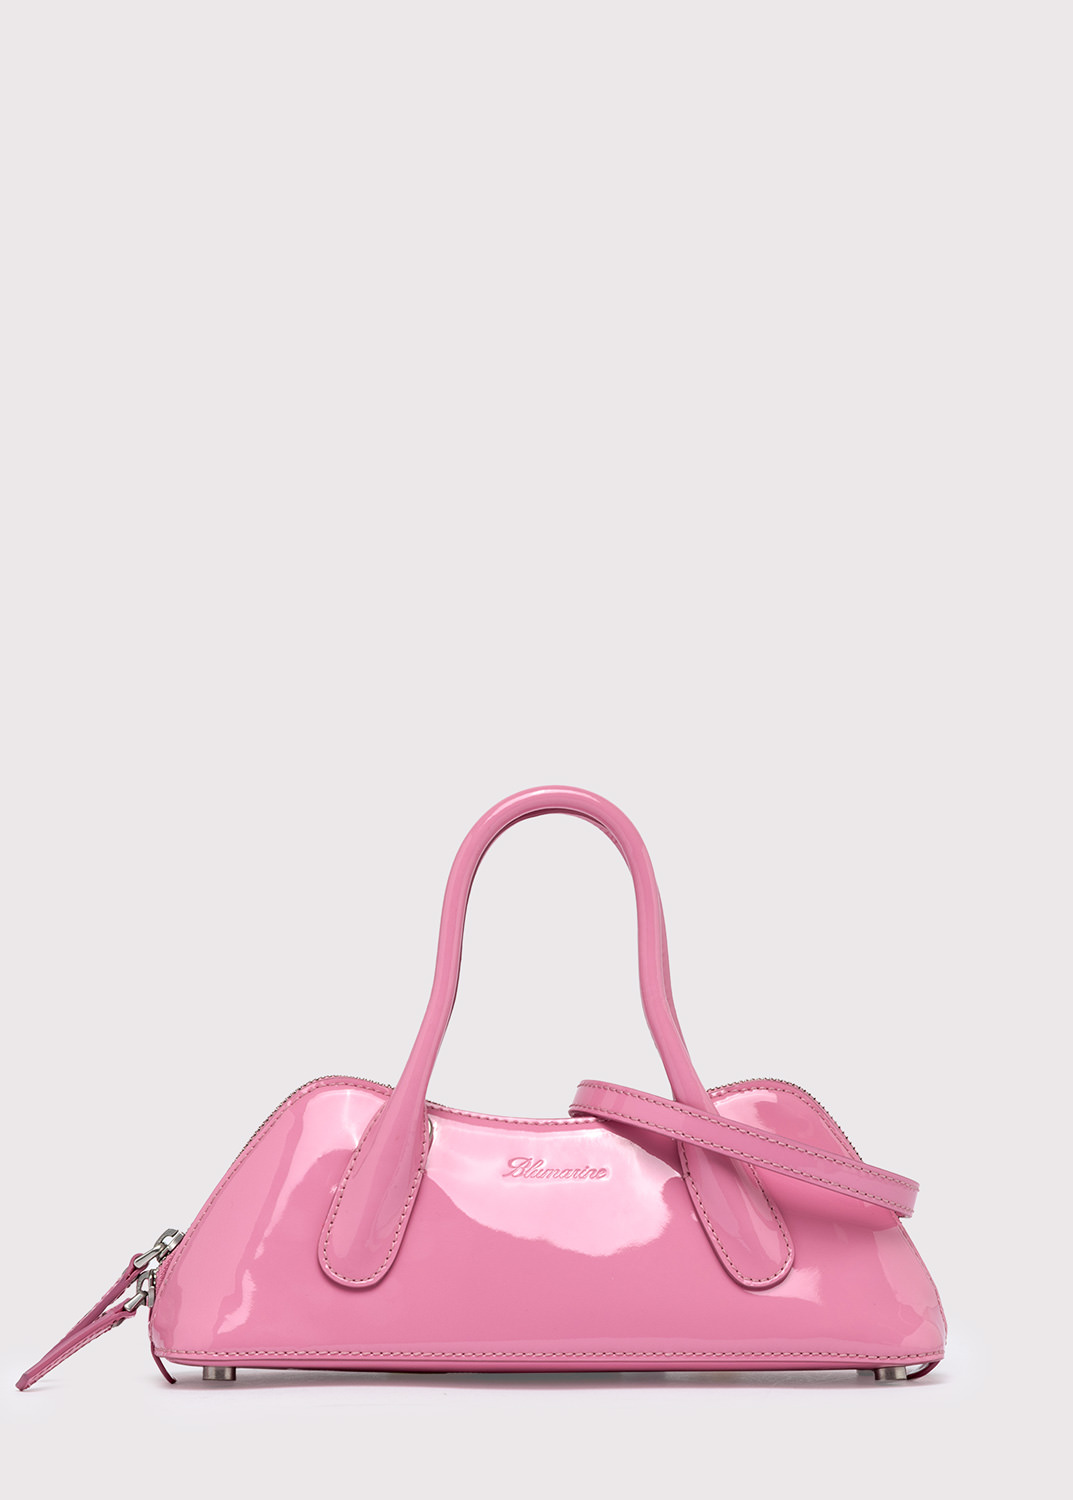 Pink Mini Bag Purse Baby Pink Purse With Detachable Strap 